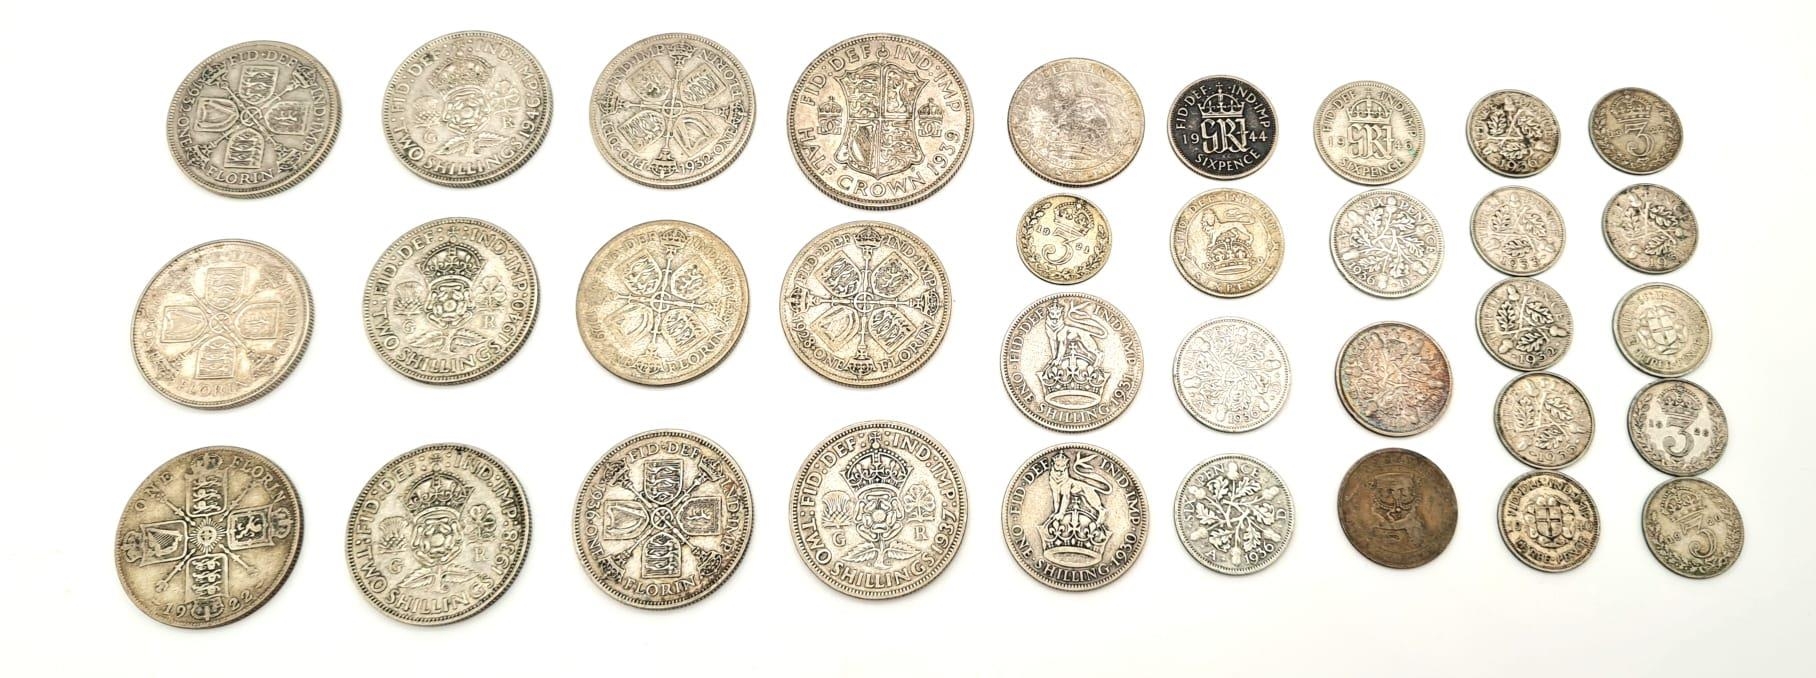 A Selection of Vintage Silver (.500) English Coins. Please see photos for conditions. 185g total - Image 2 of 8